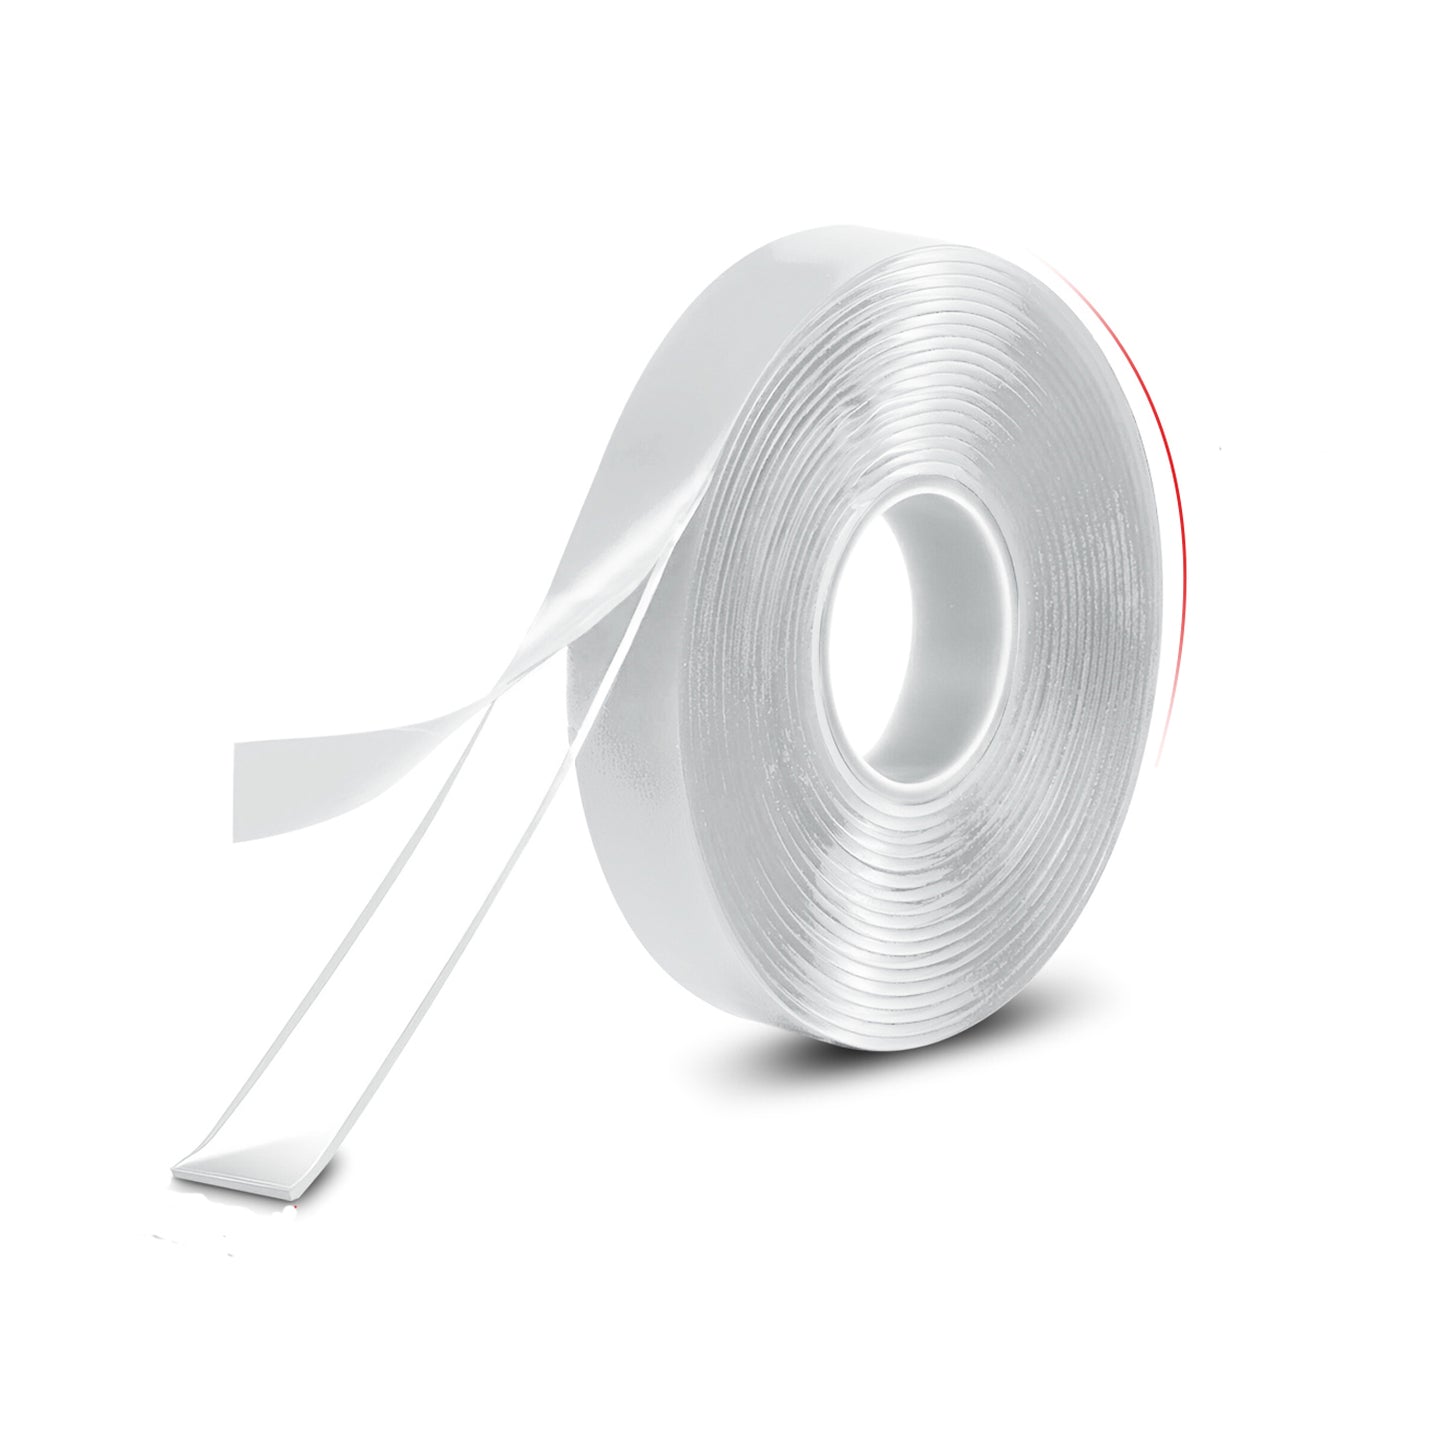  Mounting Double Sided Transparent Acrylic Tape